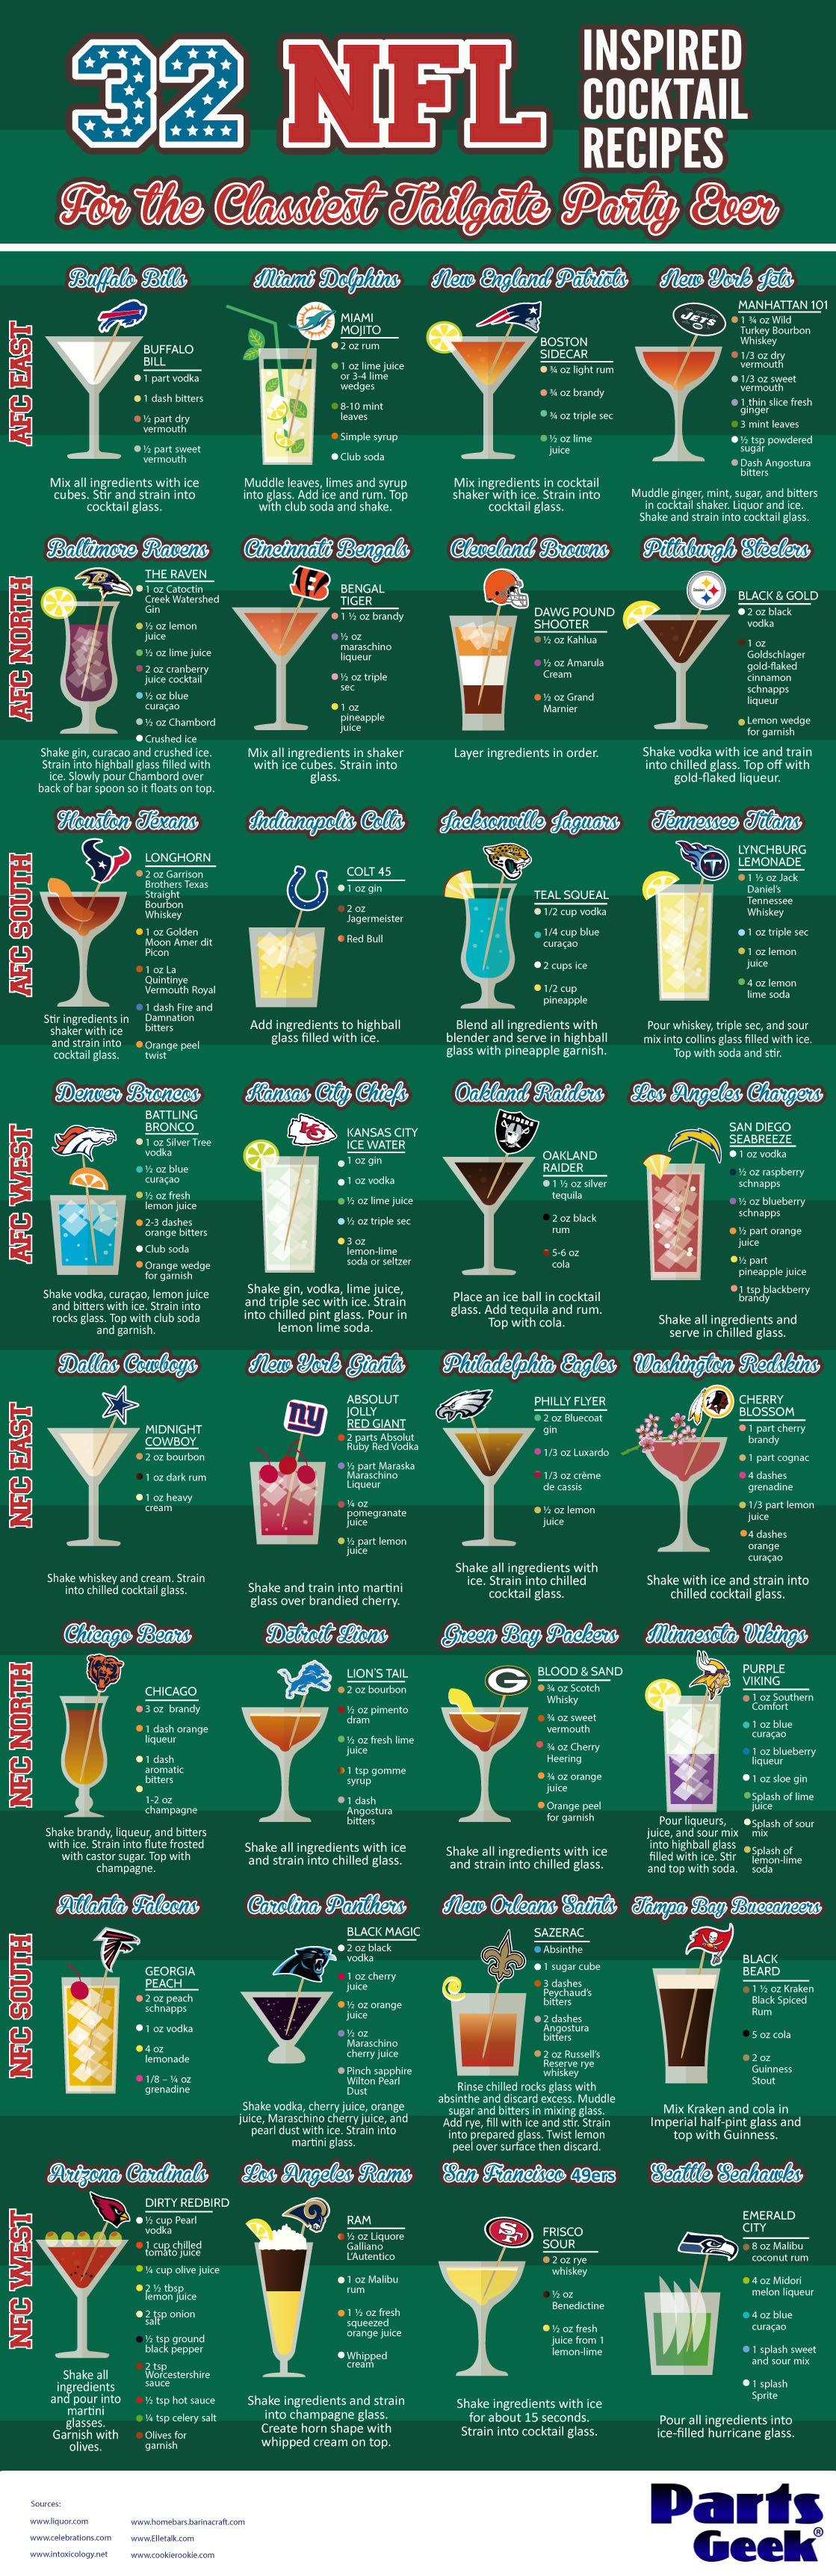 32 NFL Inspired Cocktail Recipes